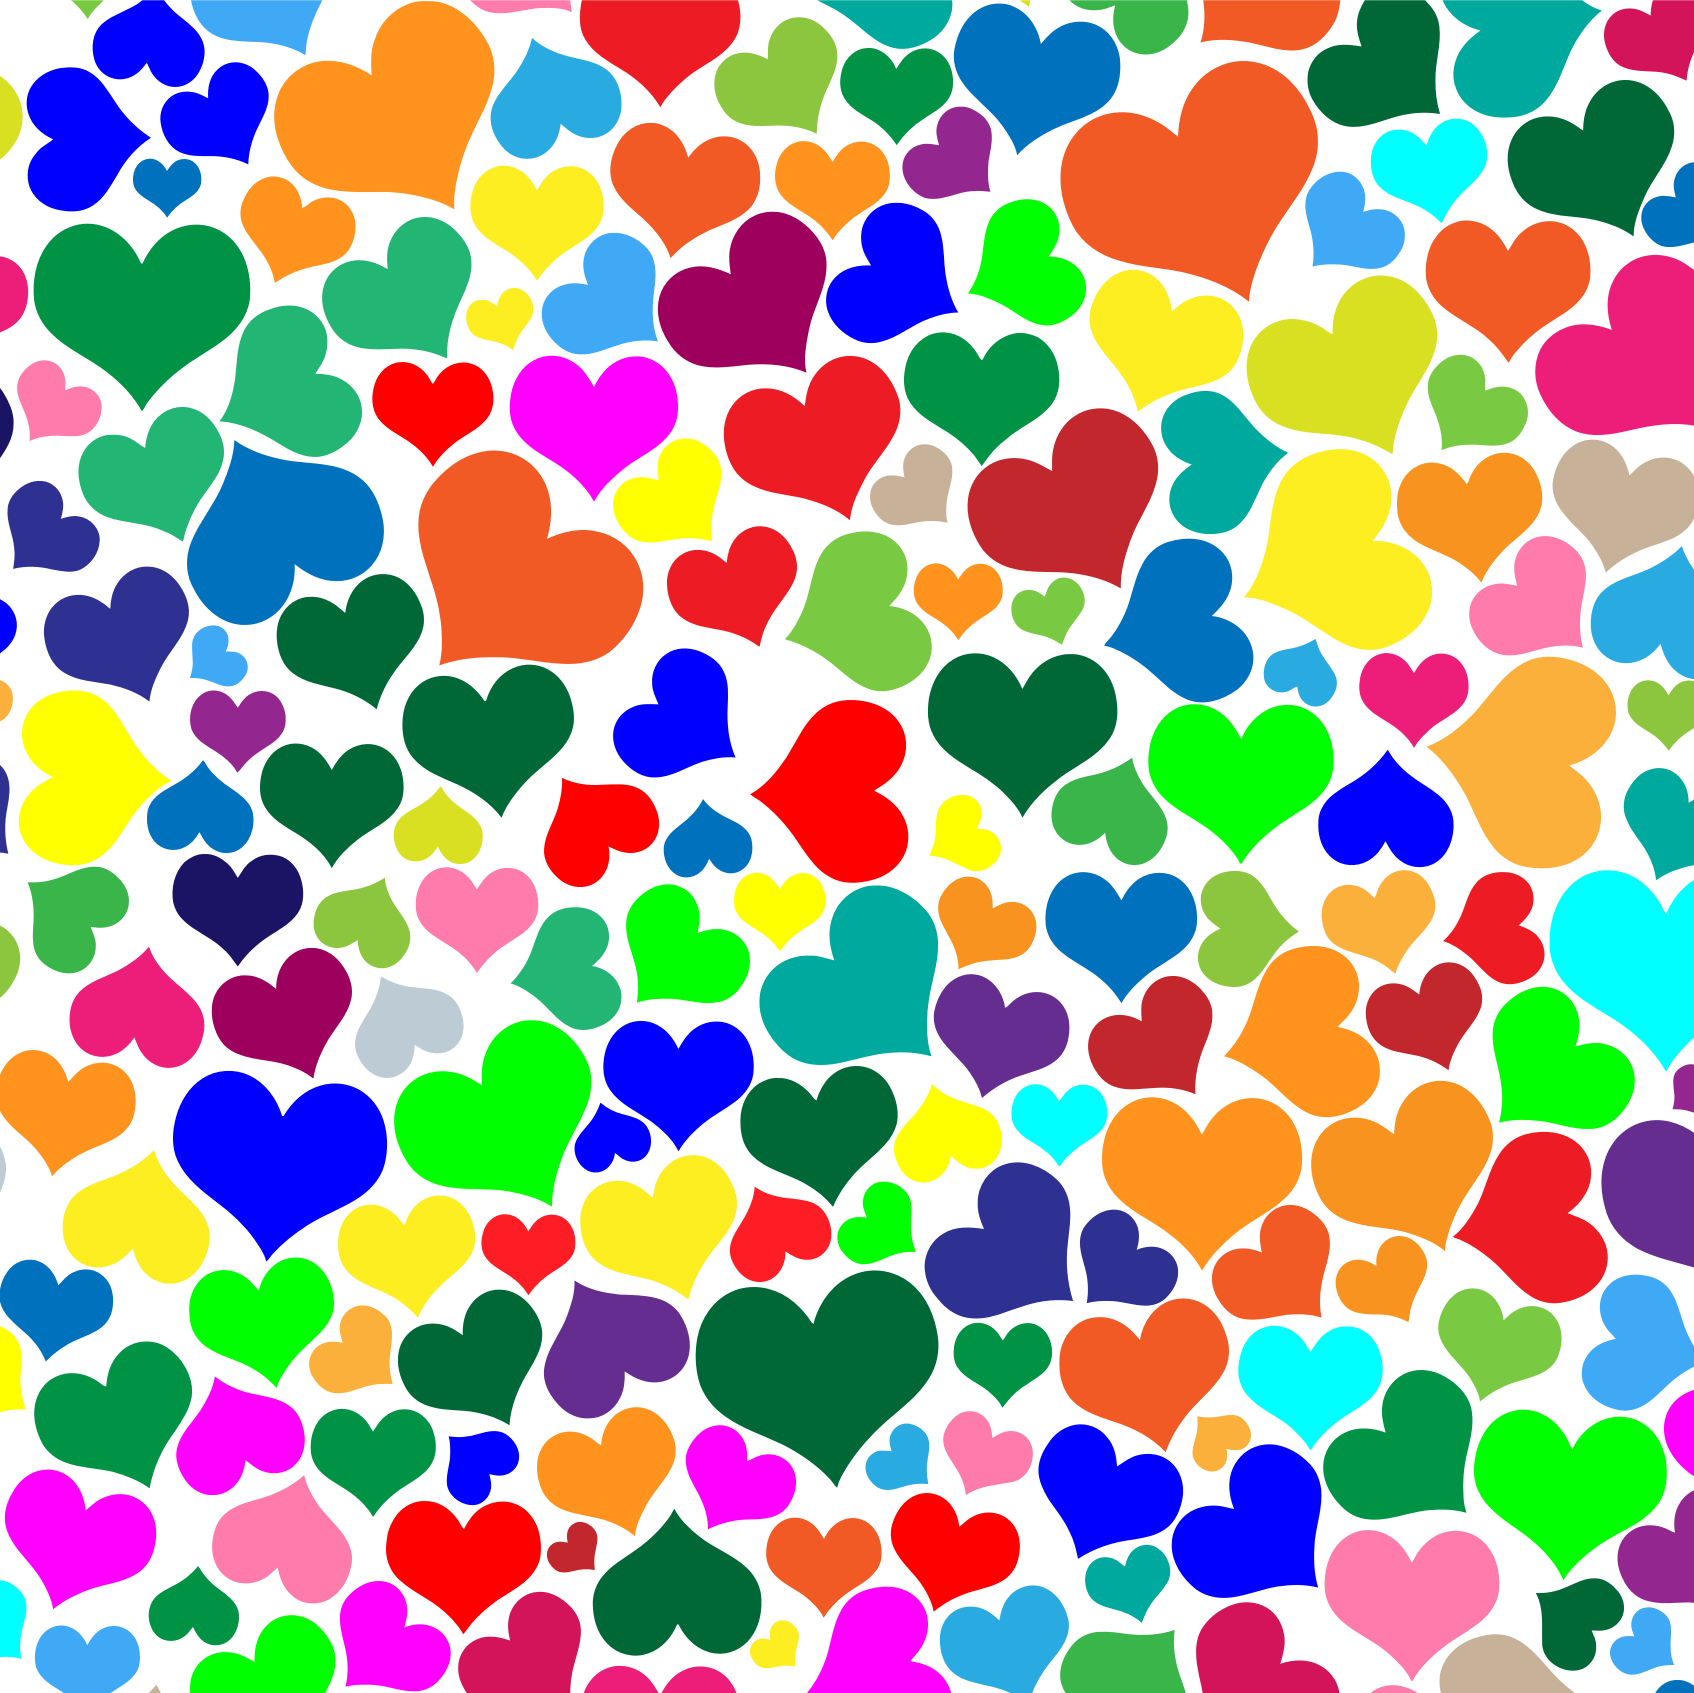 Colorful hearts for Valentine's Day